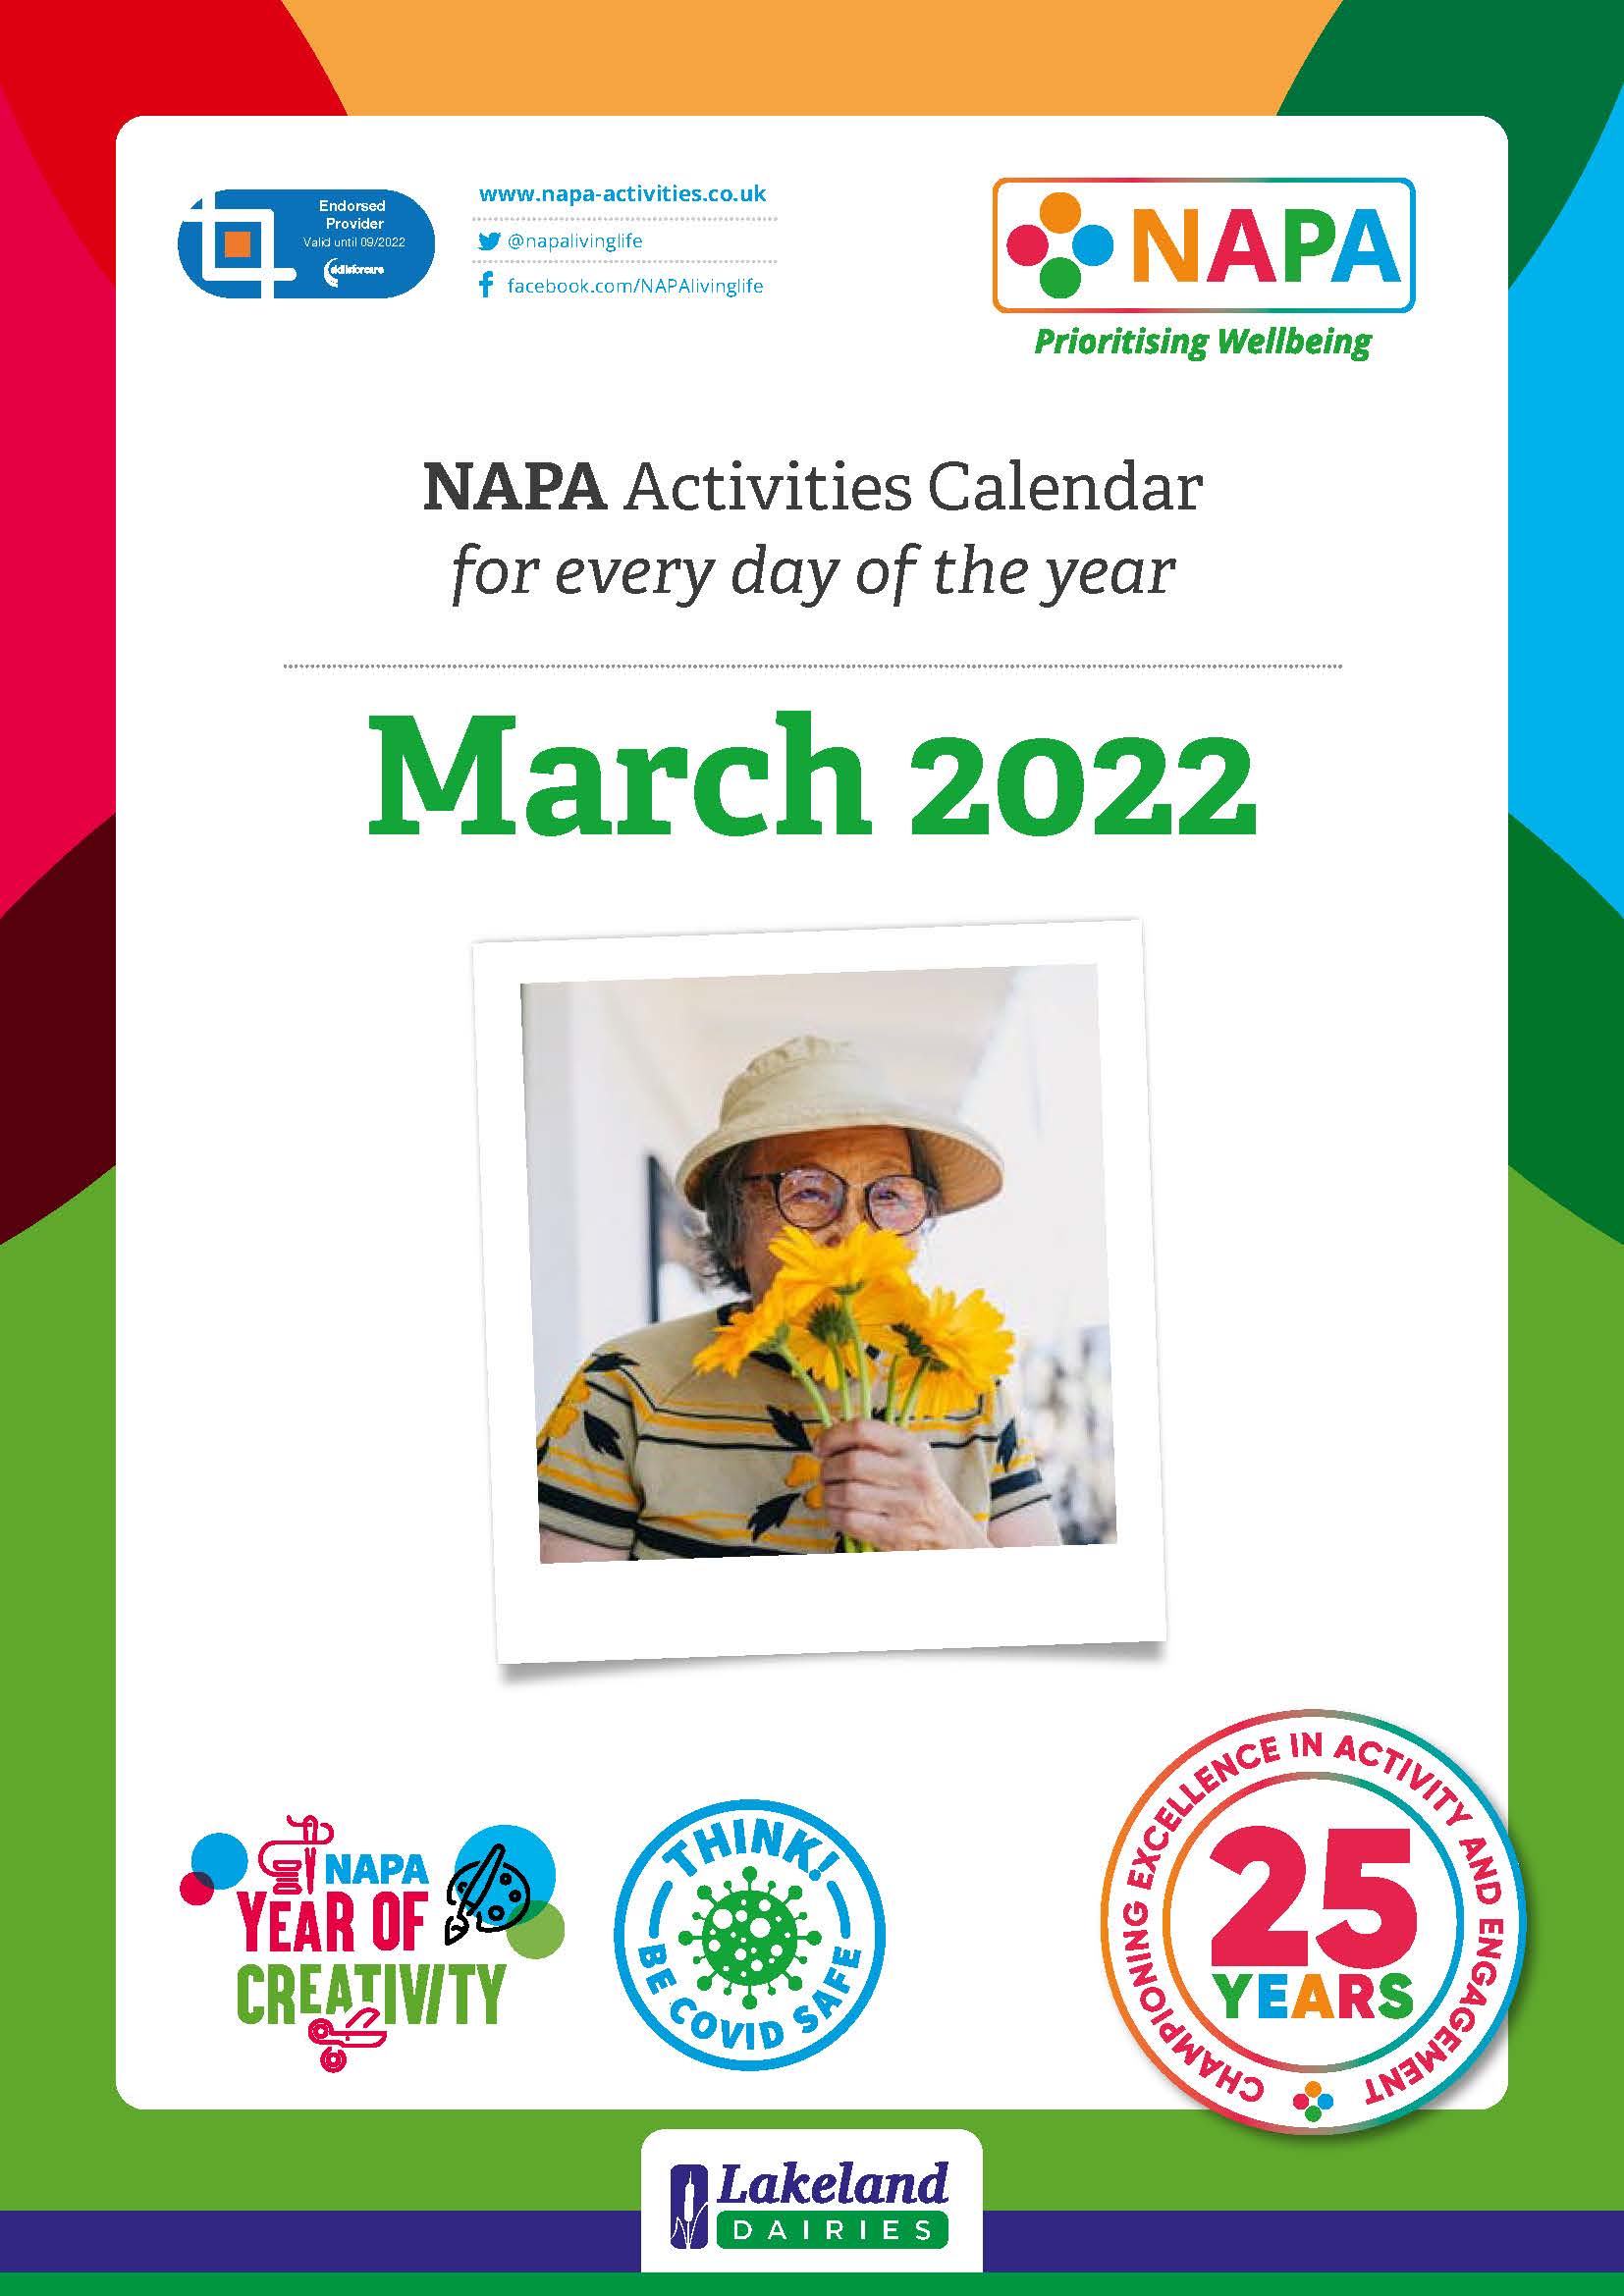 Nvusd Calendar 2022 Napa Living Life On Twitter: "Have You Seen Our March Calendar Yet? Which  Activities Are You Going To Try In Your Setting? Tell Us In The Comments 👇  Https://T.co/Qs8A3Hokfk Https://T.co/Iz5Wvlzdku" / Twitter